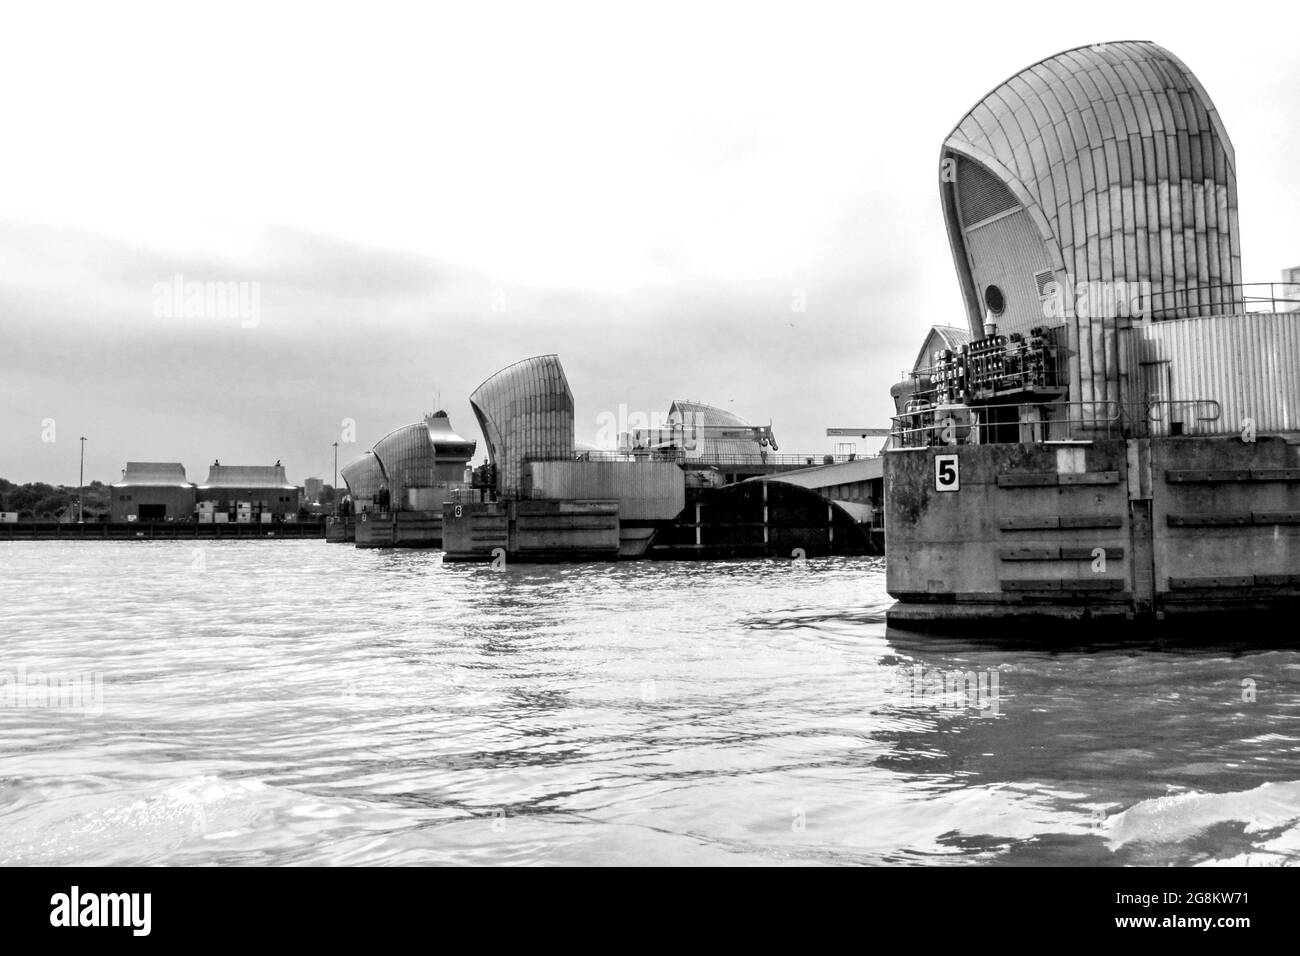 Looking along the line of the Steel-clad shells of the gates of the Thames barrier in the Thames estuary Stock Photo